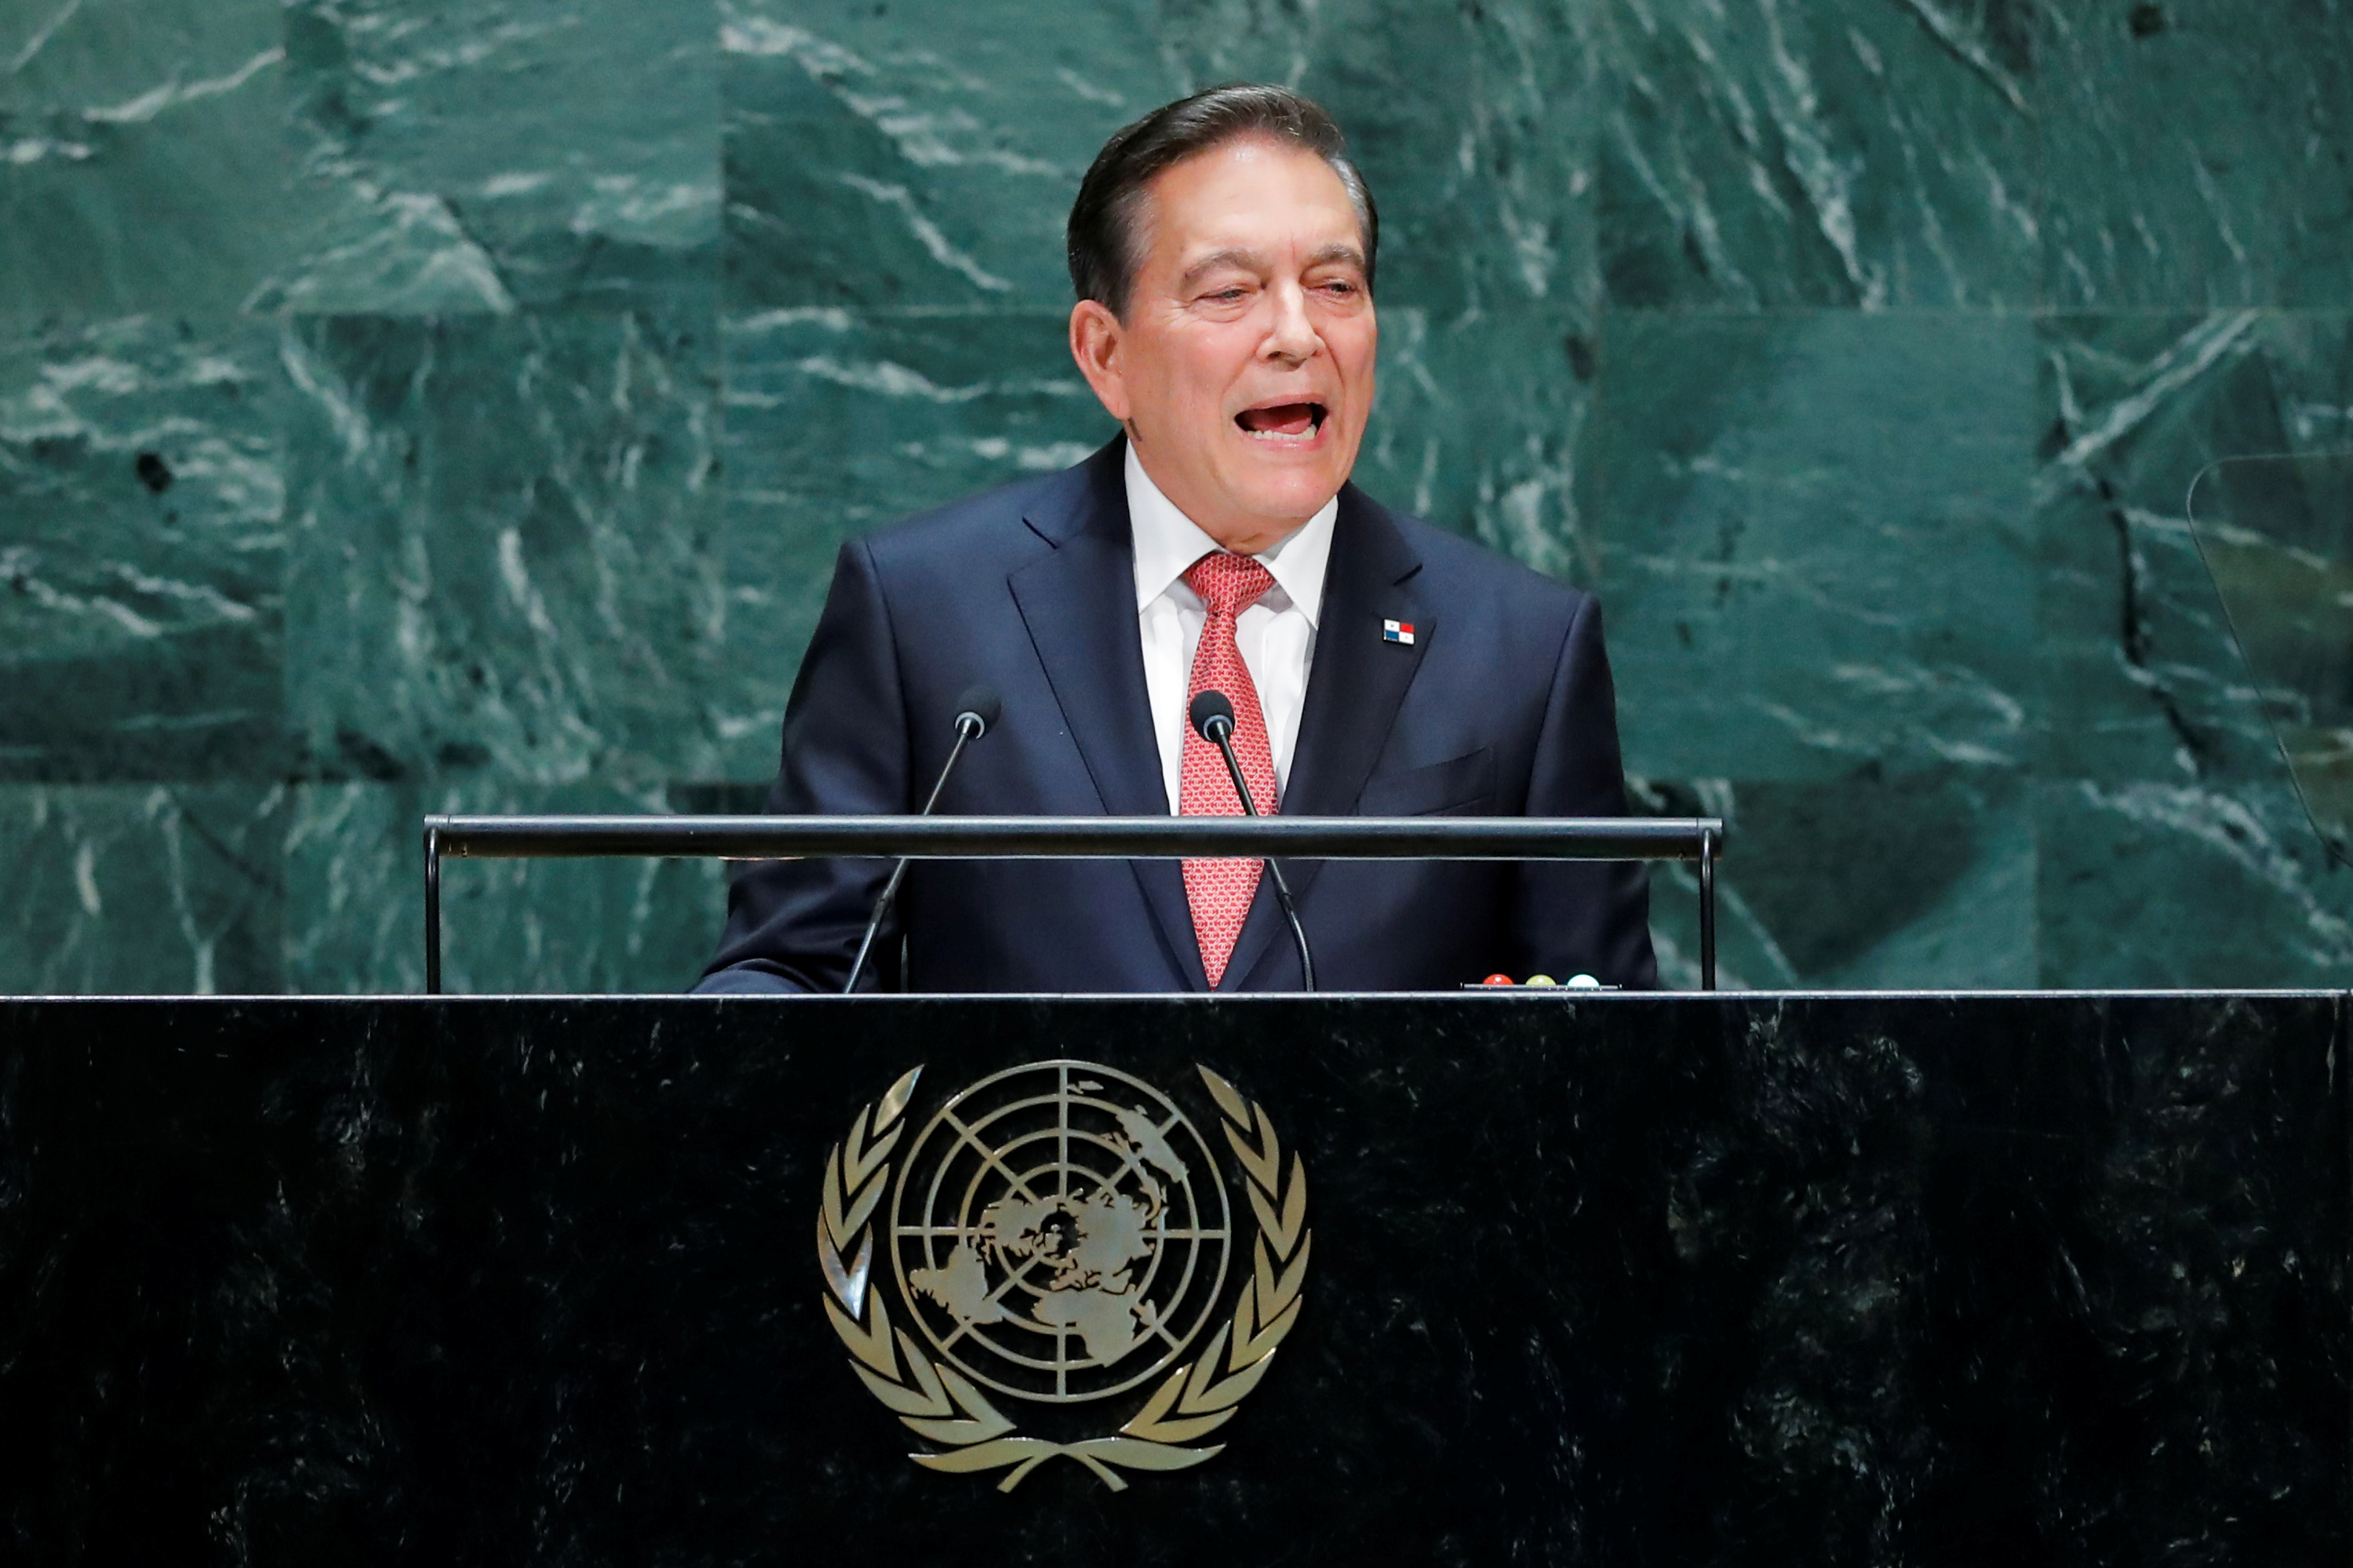 Panama's President Laurentino Cortizo addresses the 74th session of the United Nations General Assembly at U.N. headquarters in New York City, New York, U.S., September 25, 2019. REUTERS/Eduardo Munoz